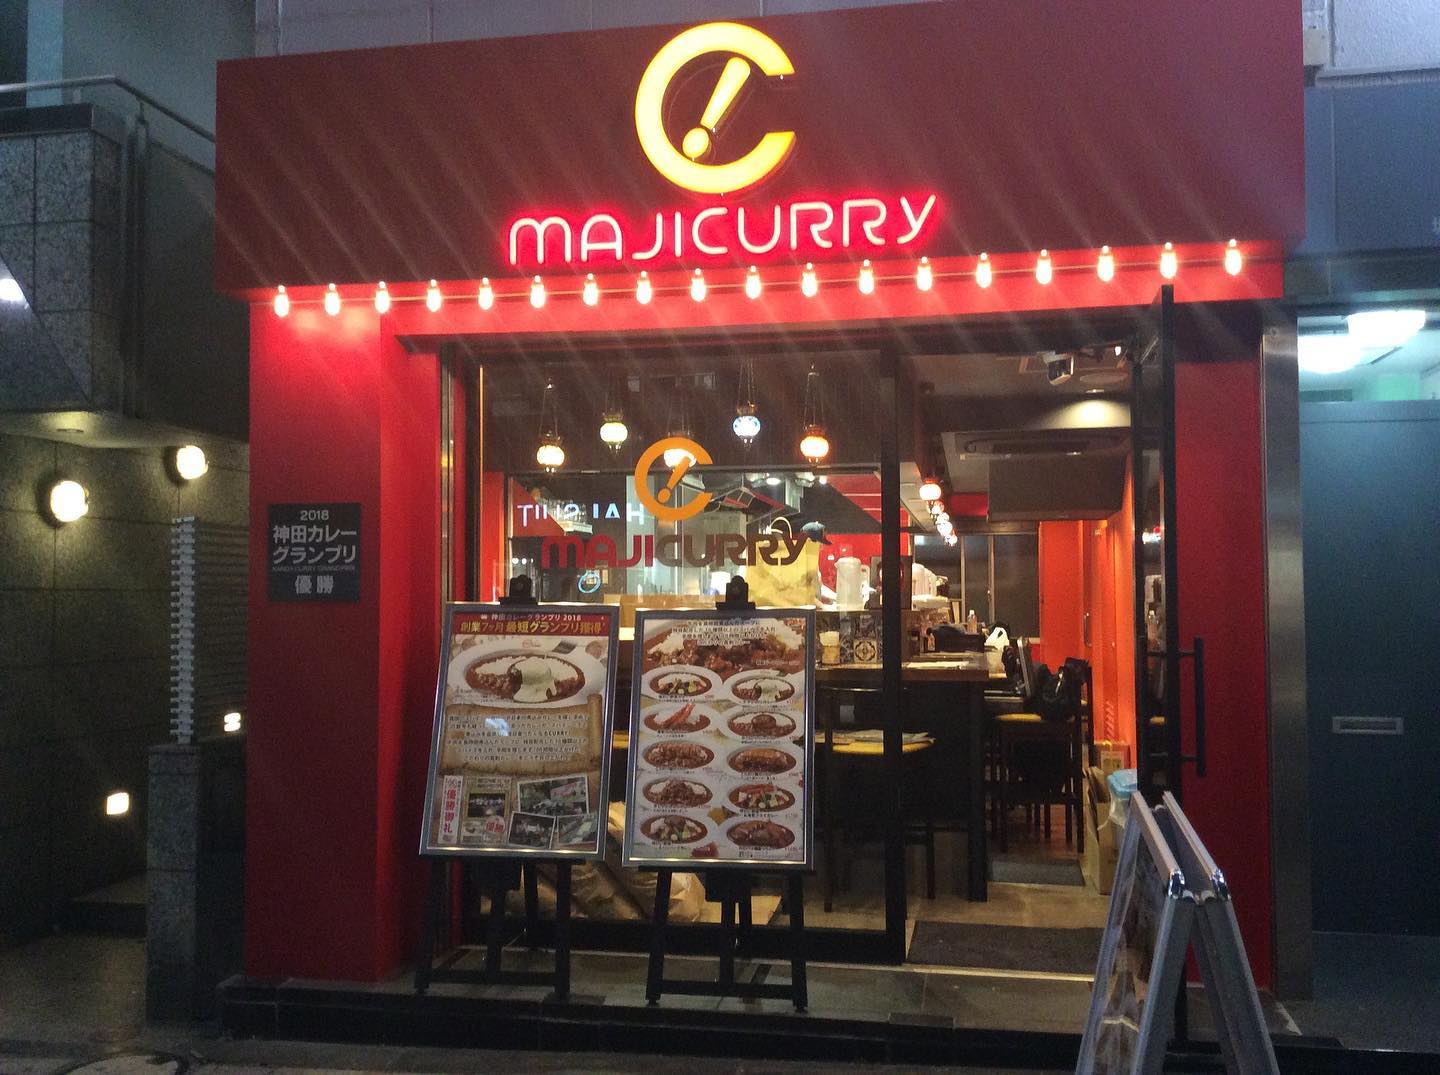 maji curry - storefront